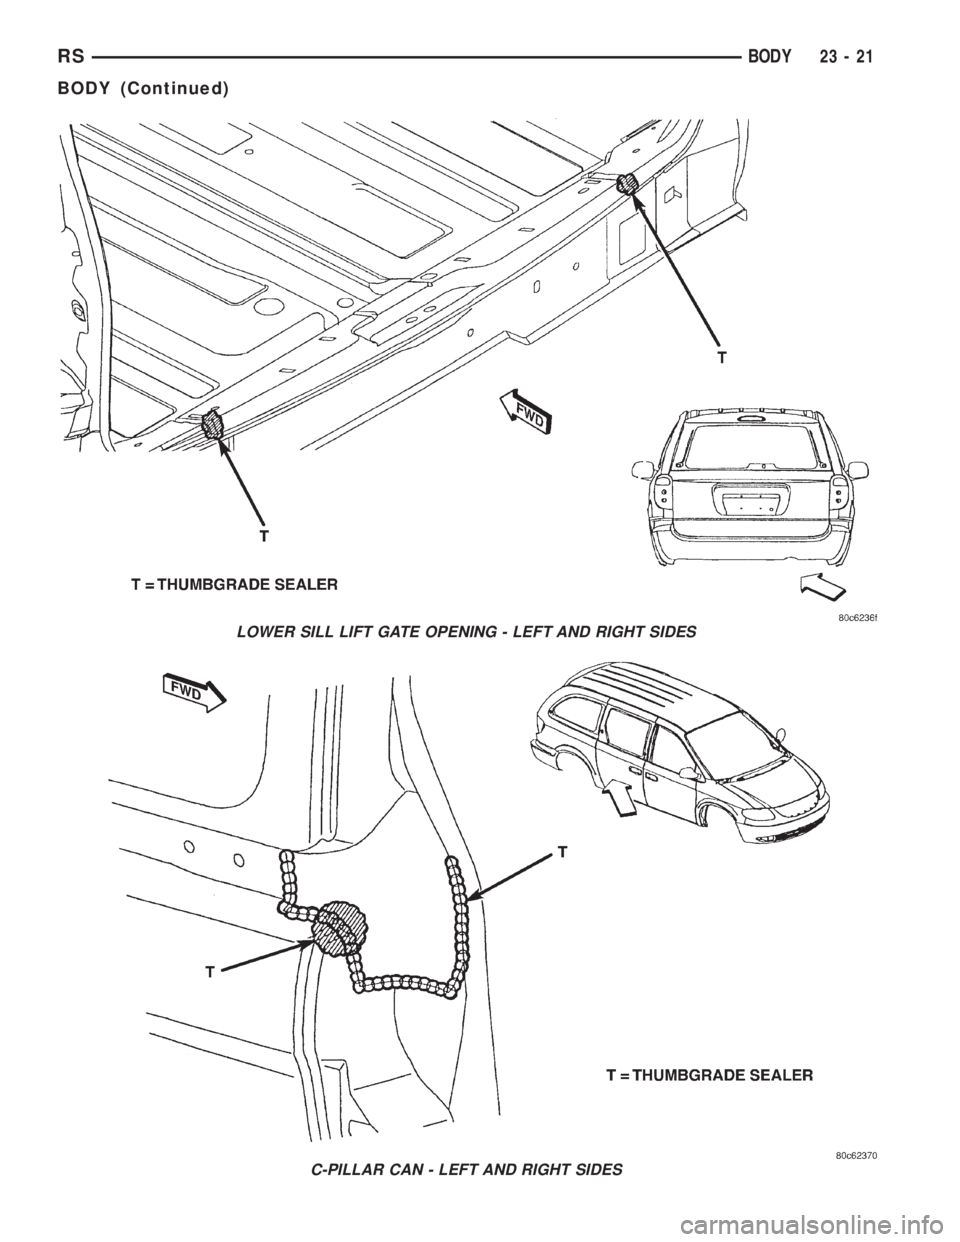 CHRYSLER VOYAGER 2001  Service Manual LOWER SILL LIFT GATE OPENING - LEFT AND RIGHT SIDES
C-PILLAR CAN - LEFT AND RIGHT SIDES
RSBODY23-21
BODY (Continued) 